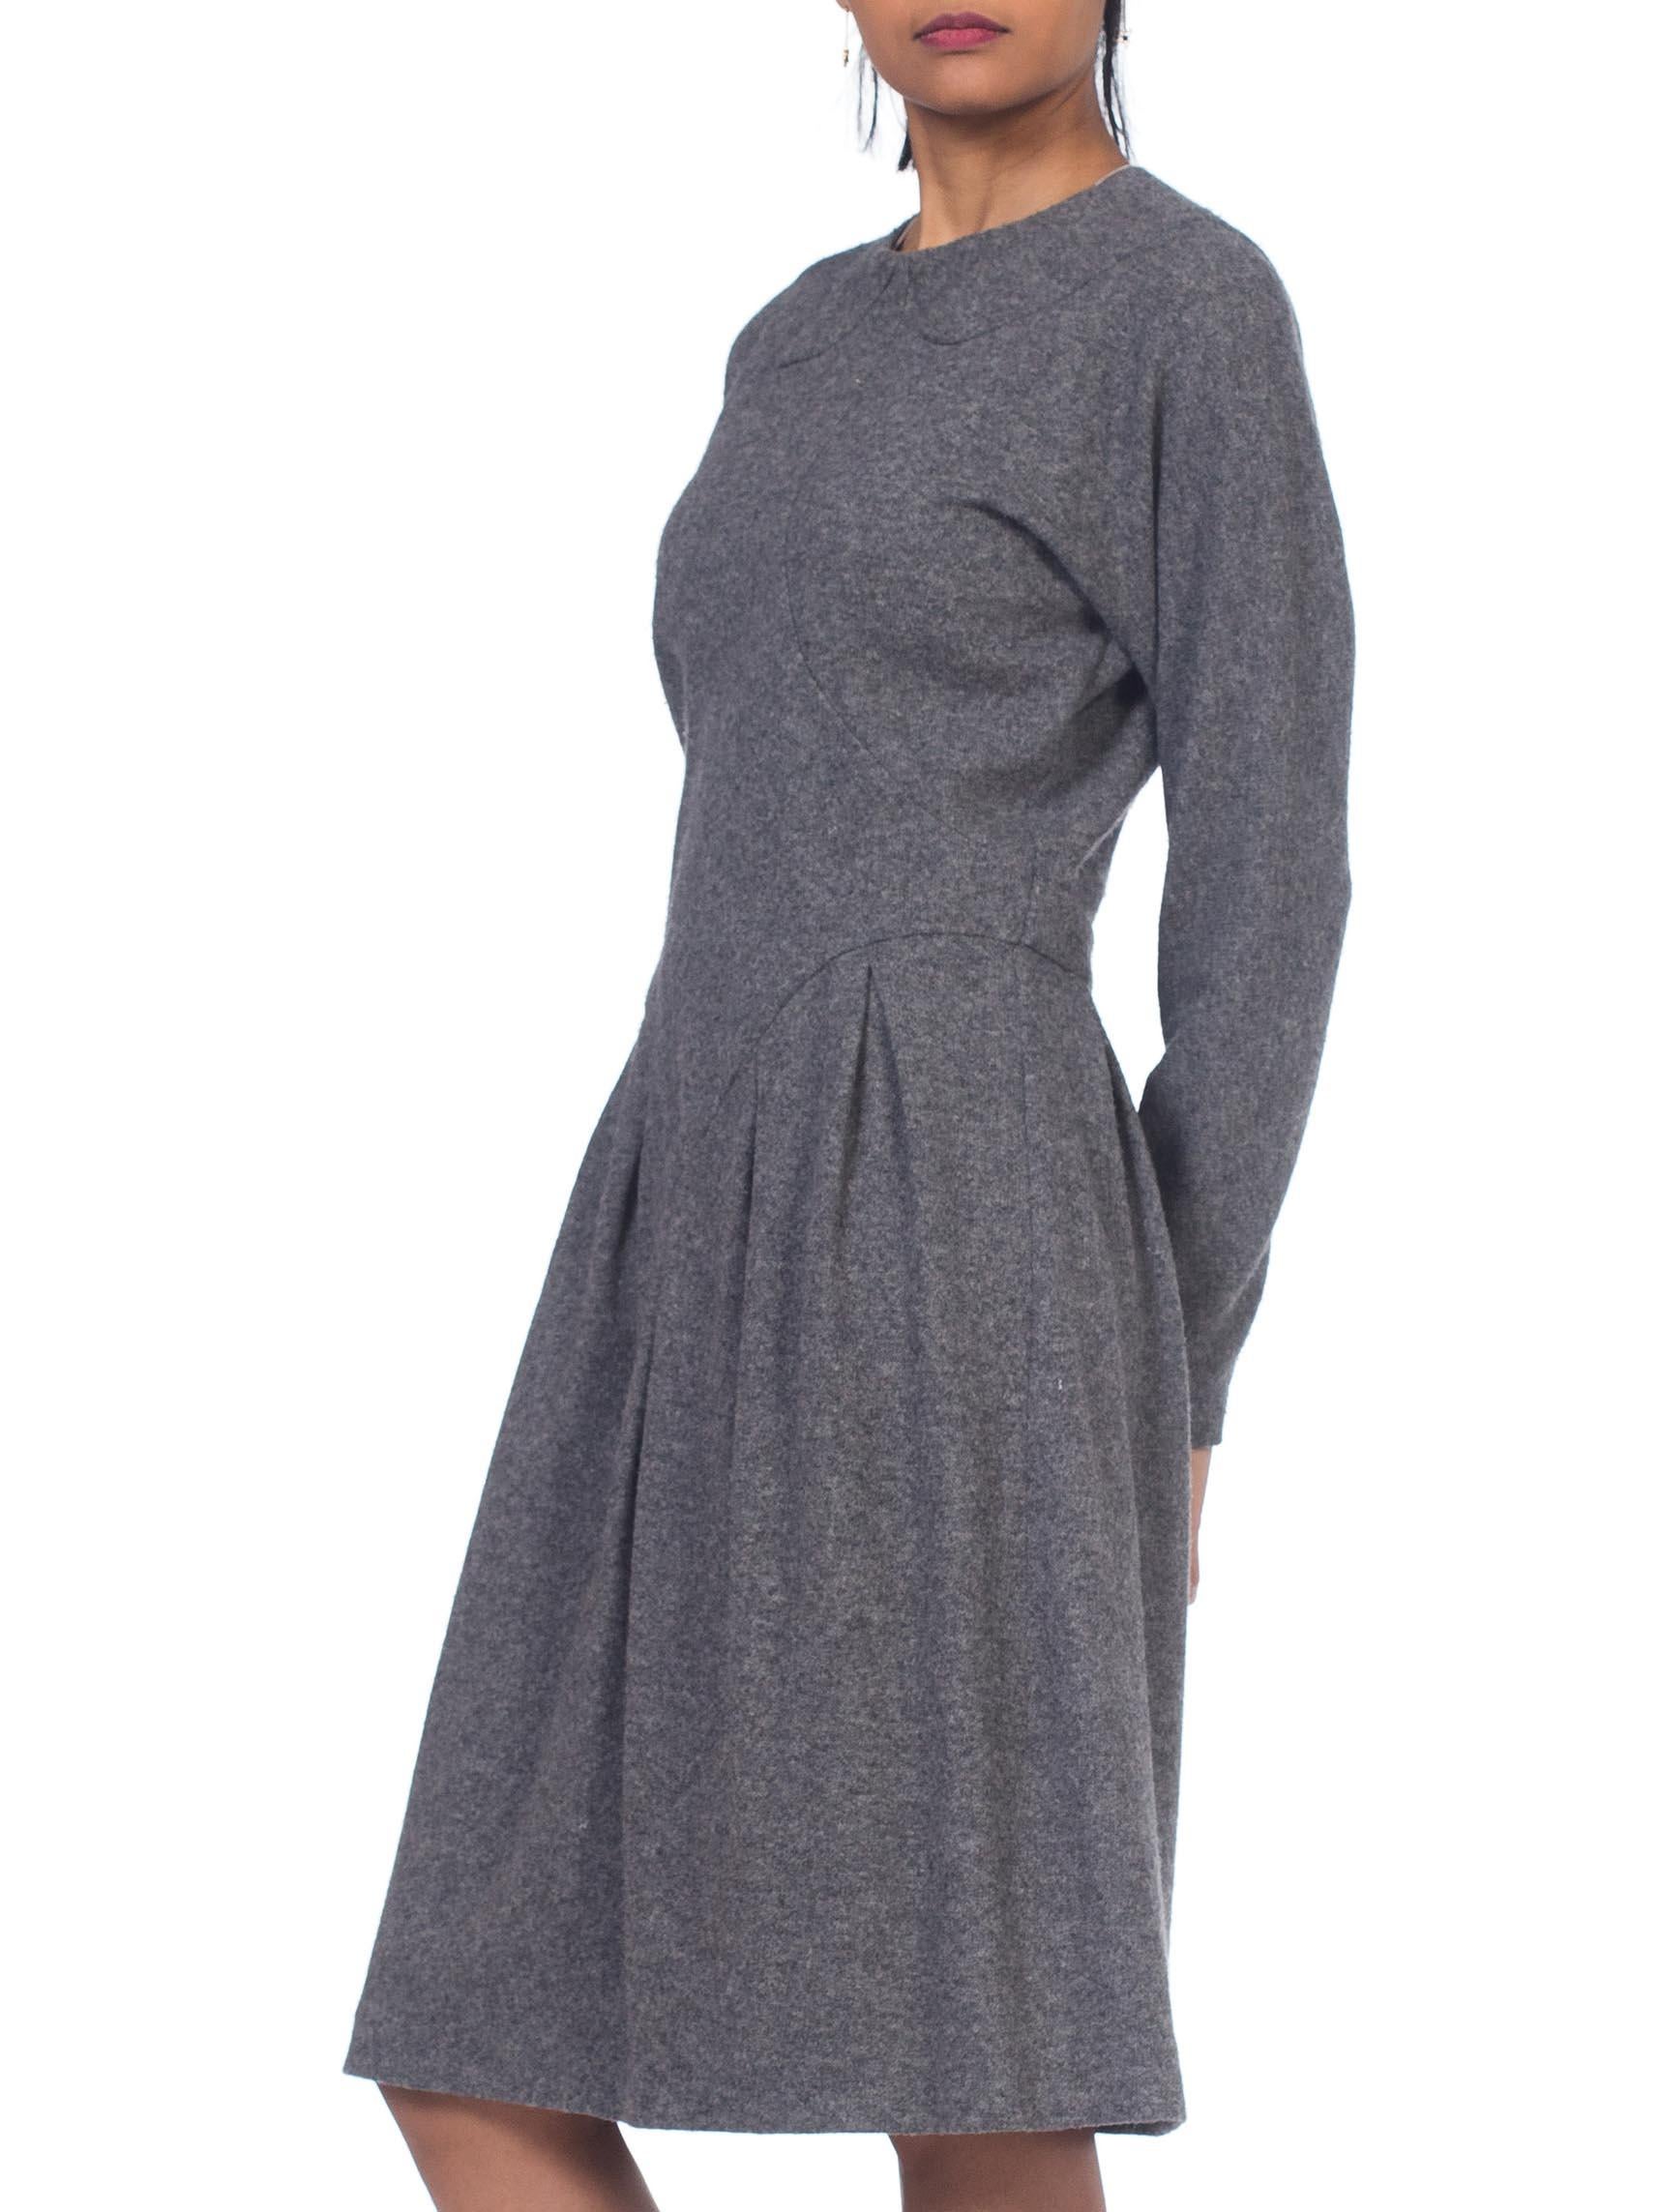 1980S GEOFFREY BEENE Grey Wool Knit Long Sleeve Sweater Dress With Partial Silk In Excellent Condition For Sale In New York, NY